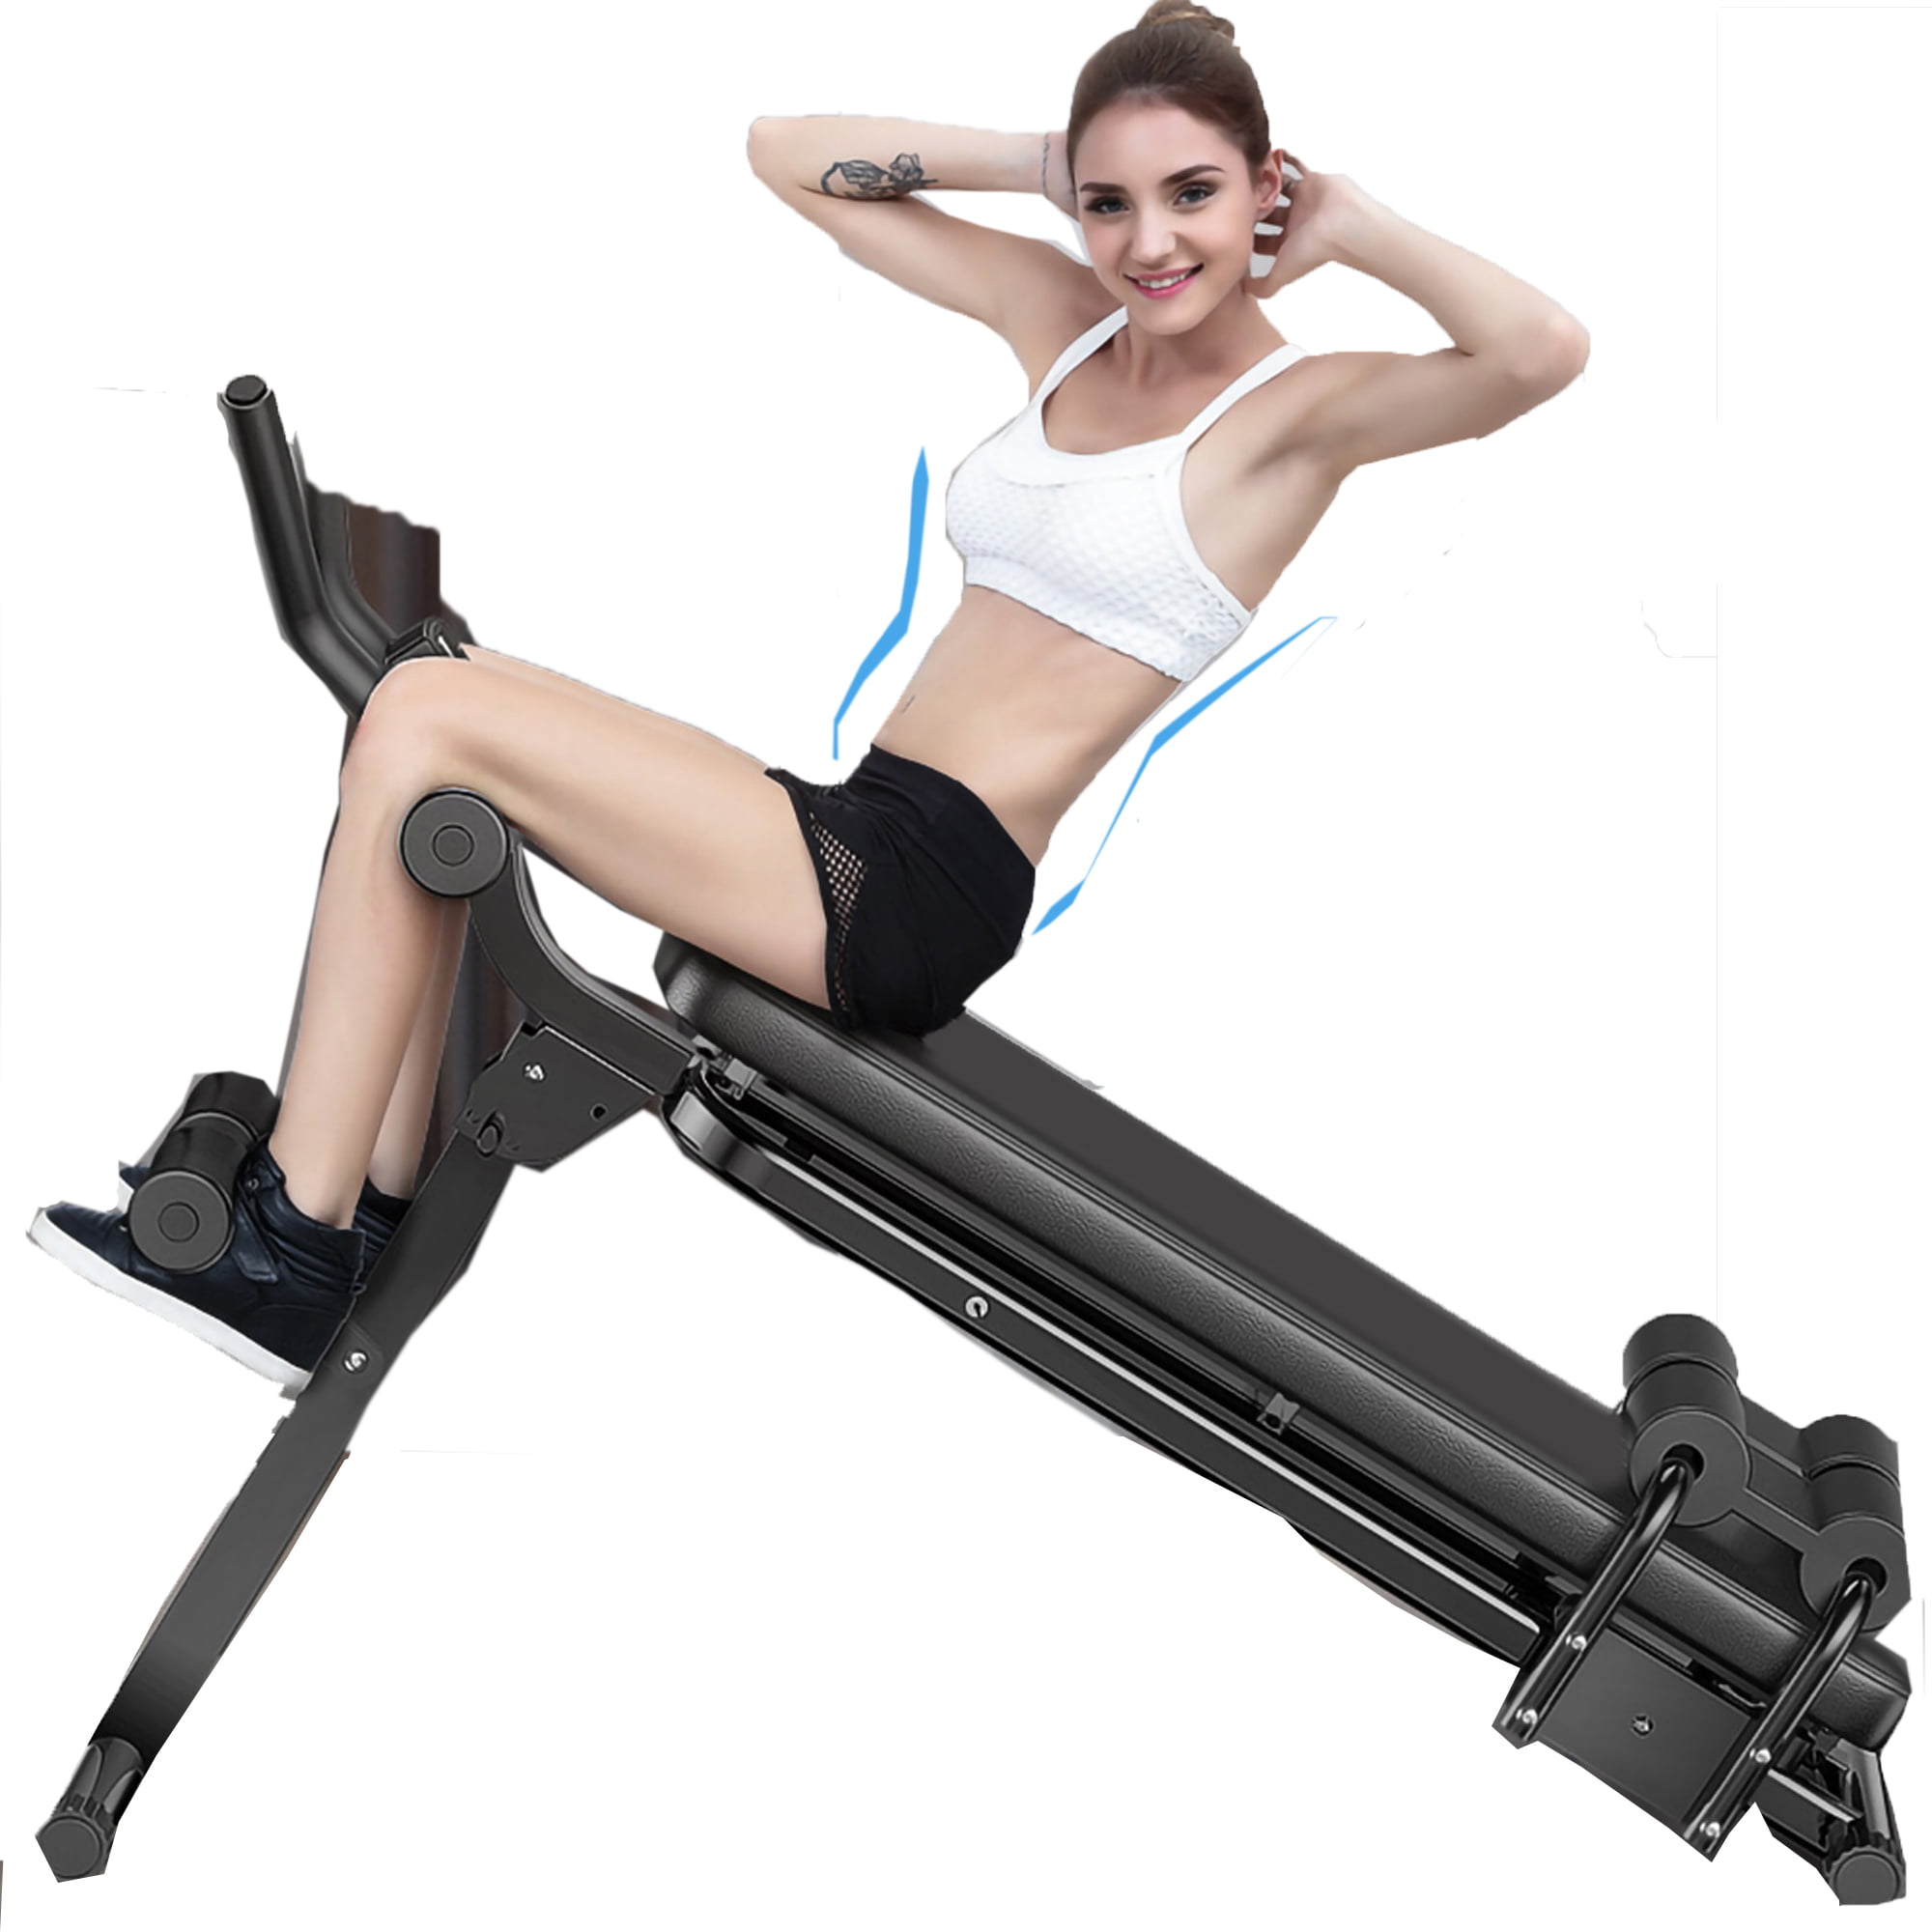 Details about   Sit Up Bench Decline Abdominal Fitness Home Gym AB Workout Exercise Equipment 